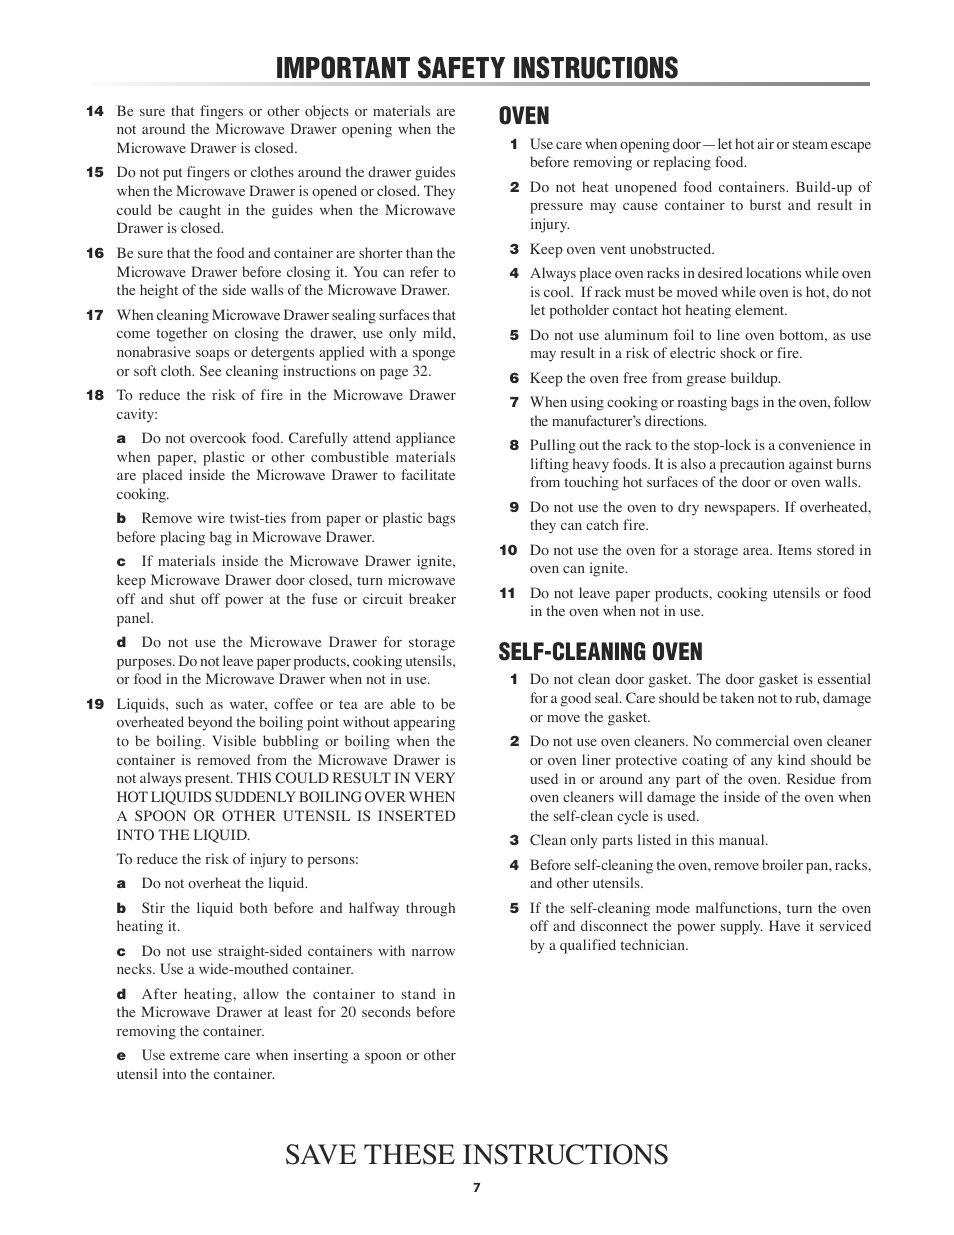 Ve drawer™ -7, Save these instructions, Important safety instructions | Oven, Self-cleaning oven | Sharp KB-3411J User Manual | Page 7 / 40